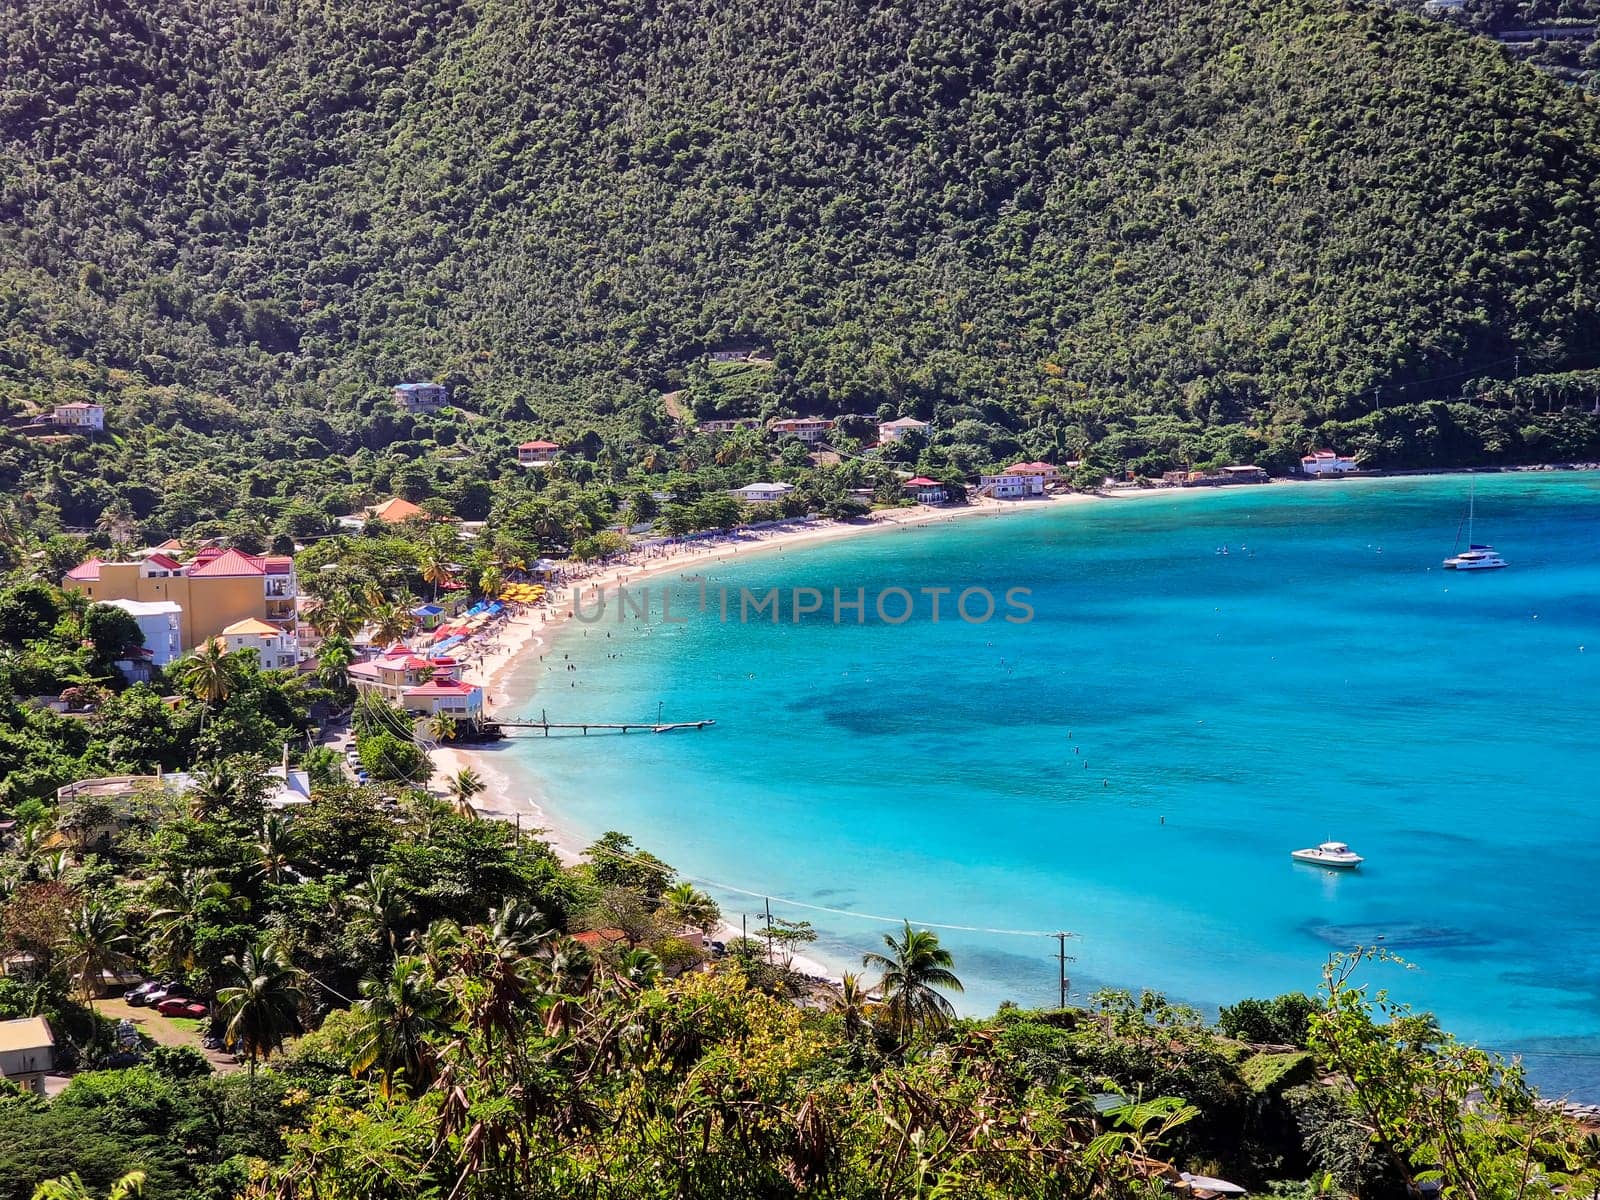 The Caribbean Islands' natural scenery by contas